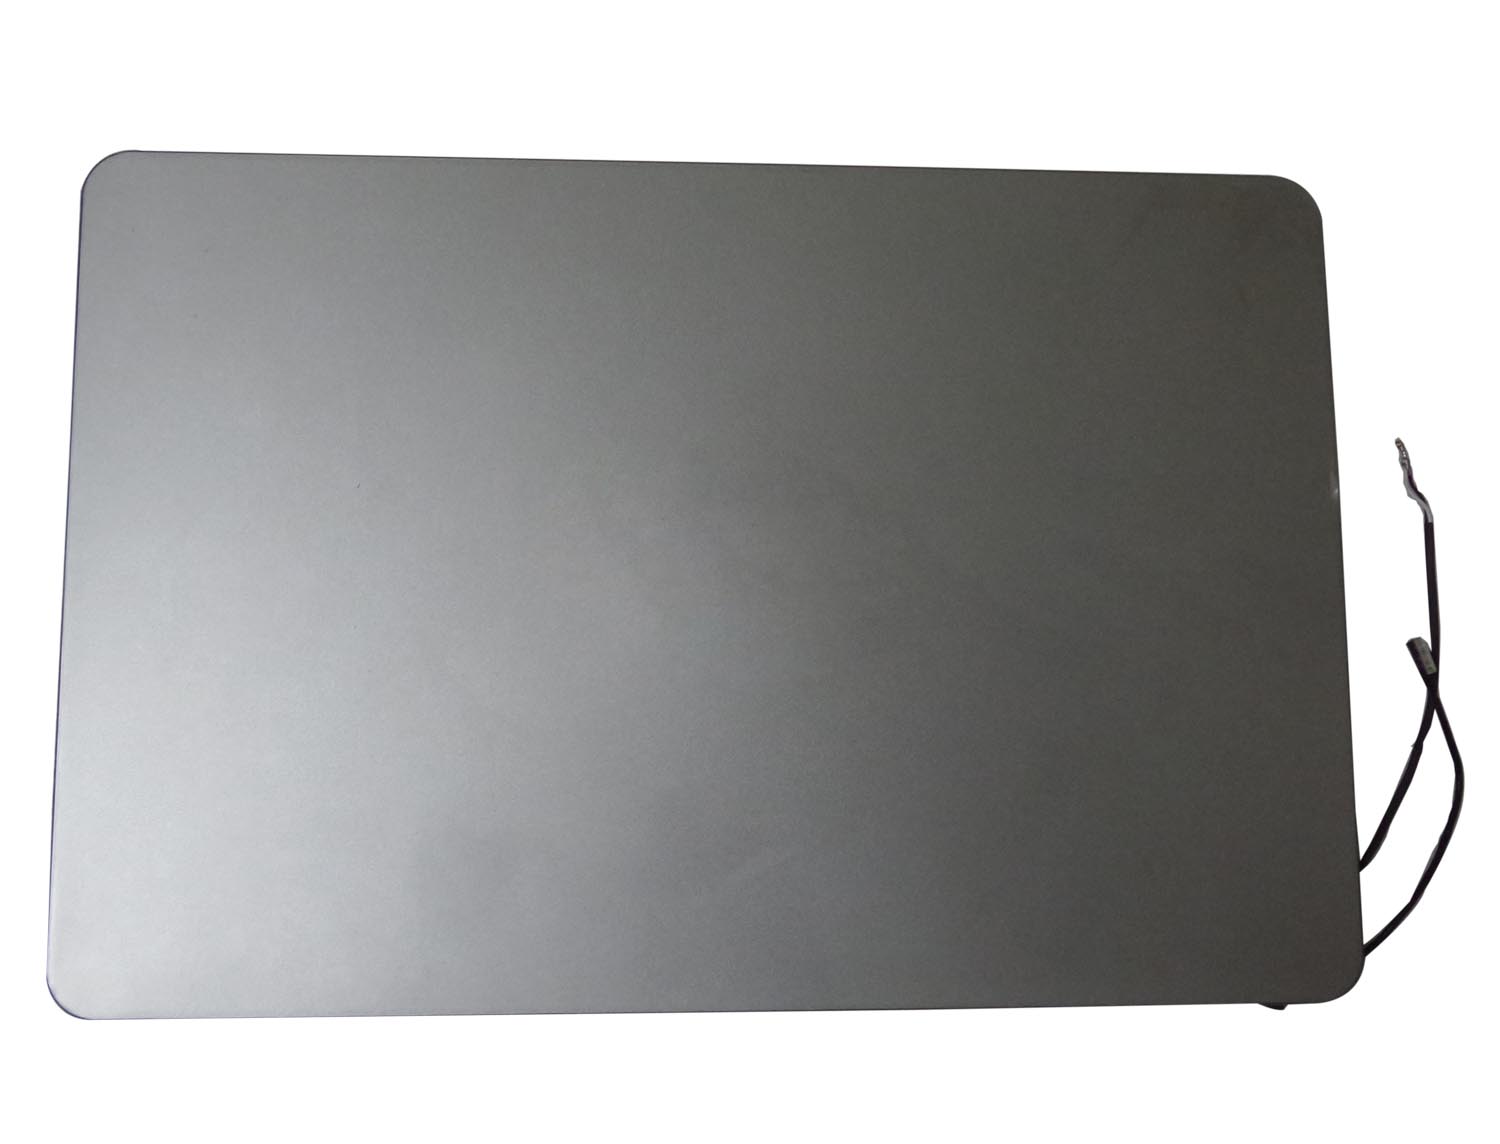 Full Screen Replacement for Dell Inspiron 15 7537 FHD